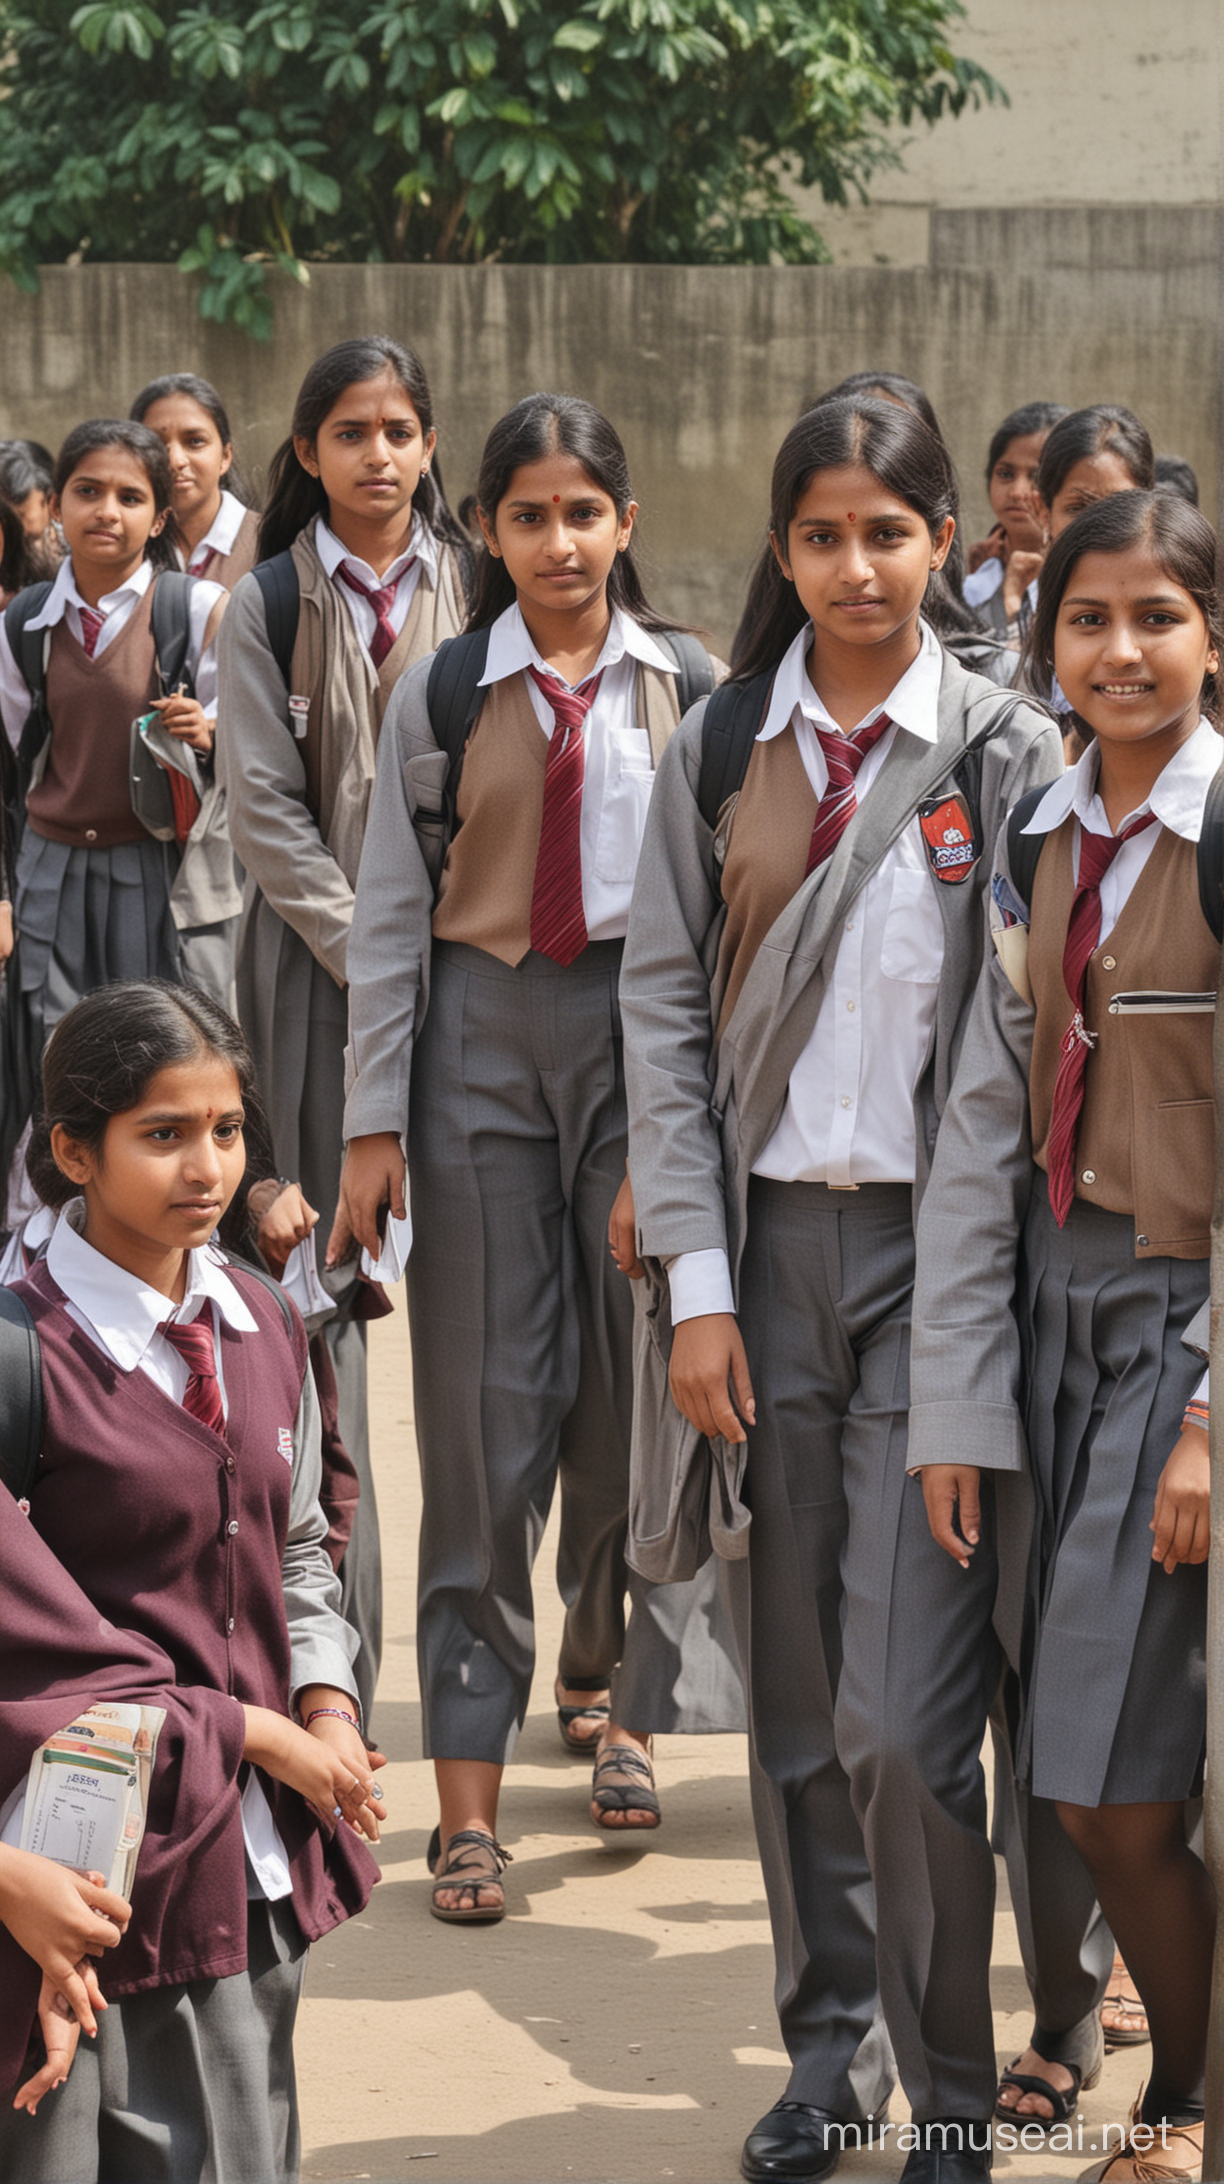 A Indian school principal dismissed female students from class